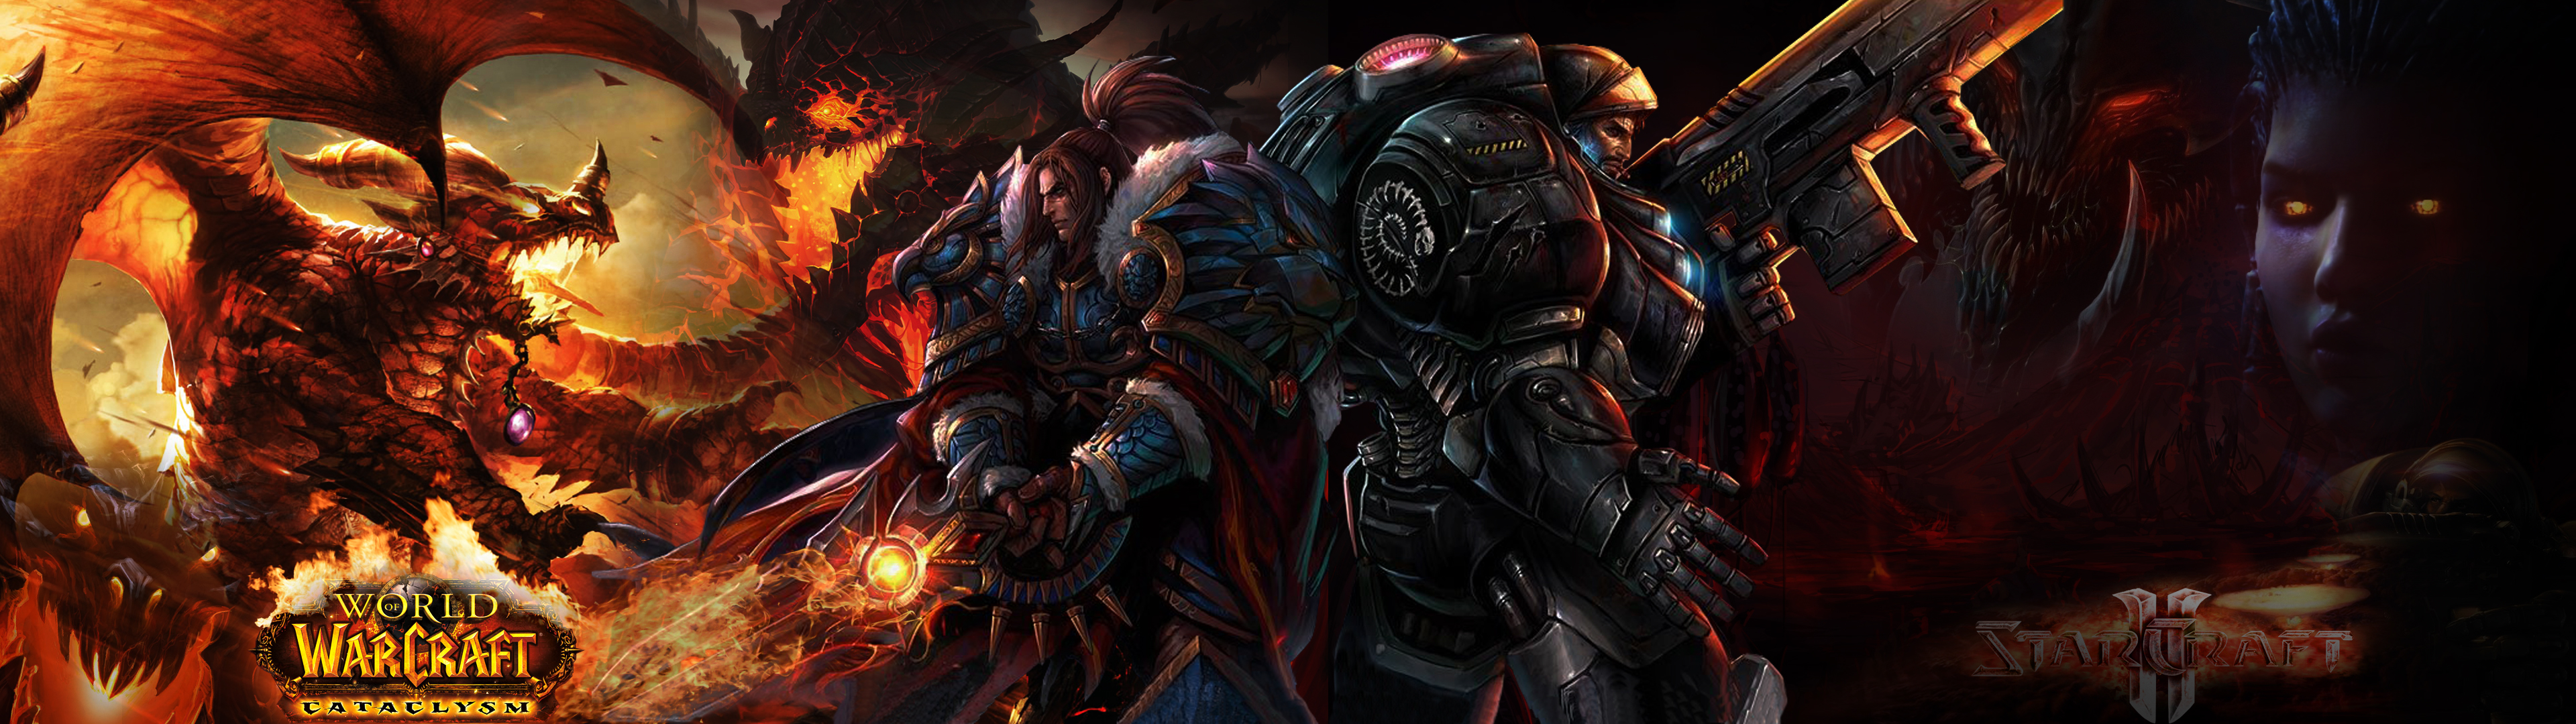 WoW and SC2 Dual Screen Wallpaper by CHIPINATORs on DeviantArt